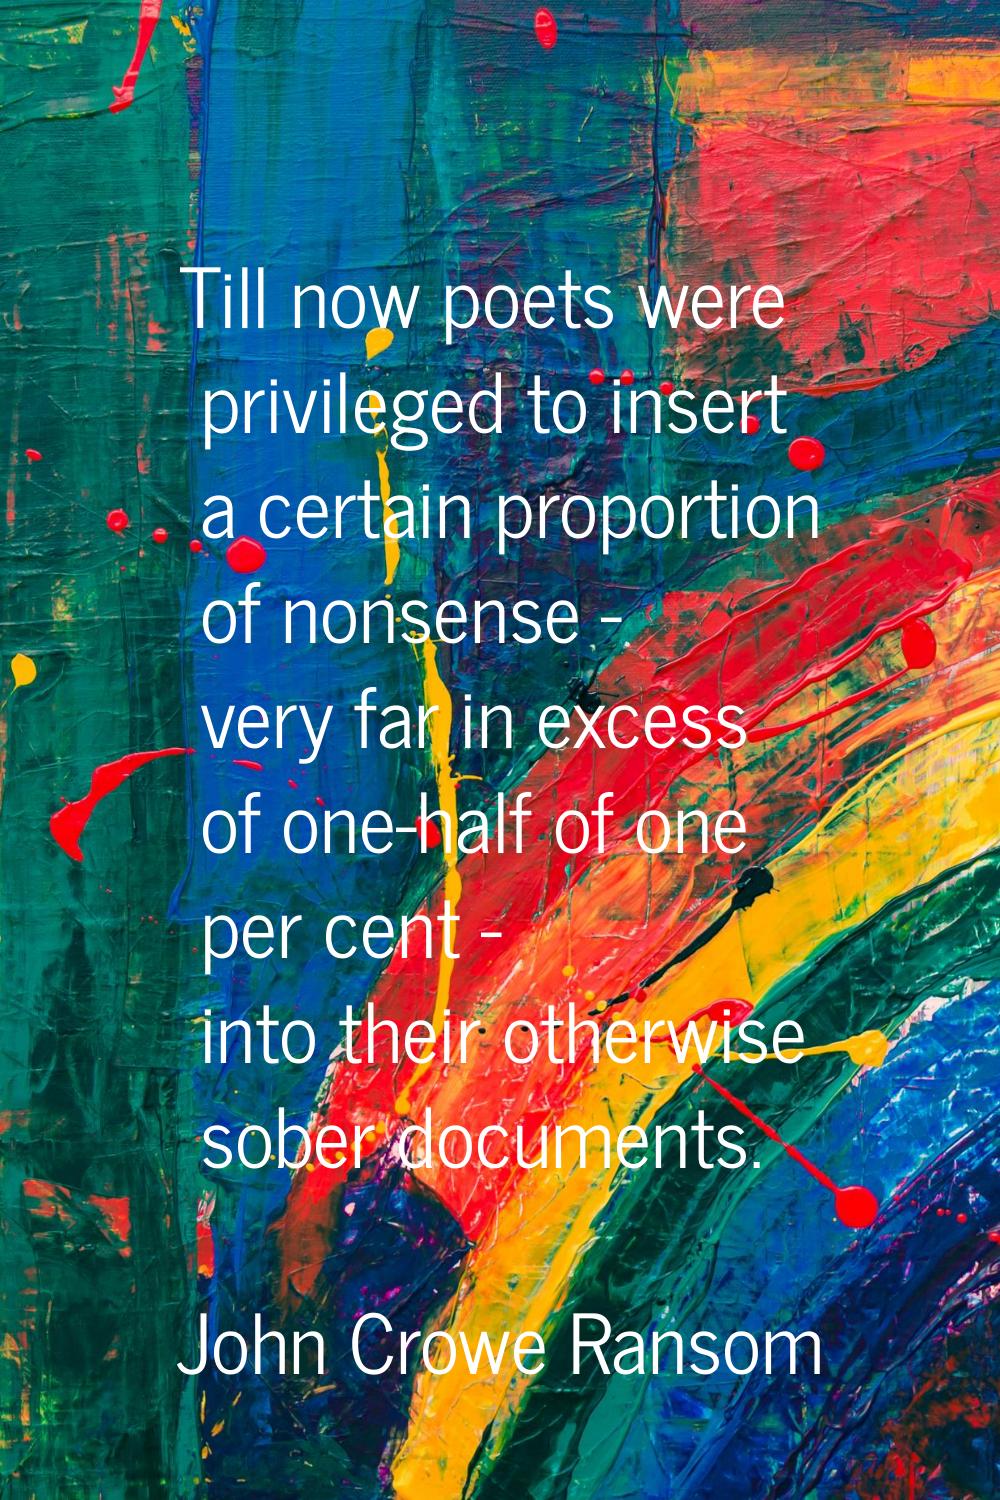 Till now poets were privileged to insert a certain proportion of nonsense - very far in excess of o